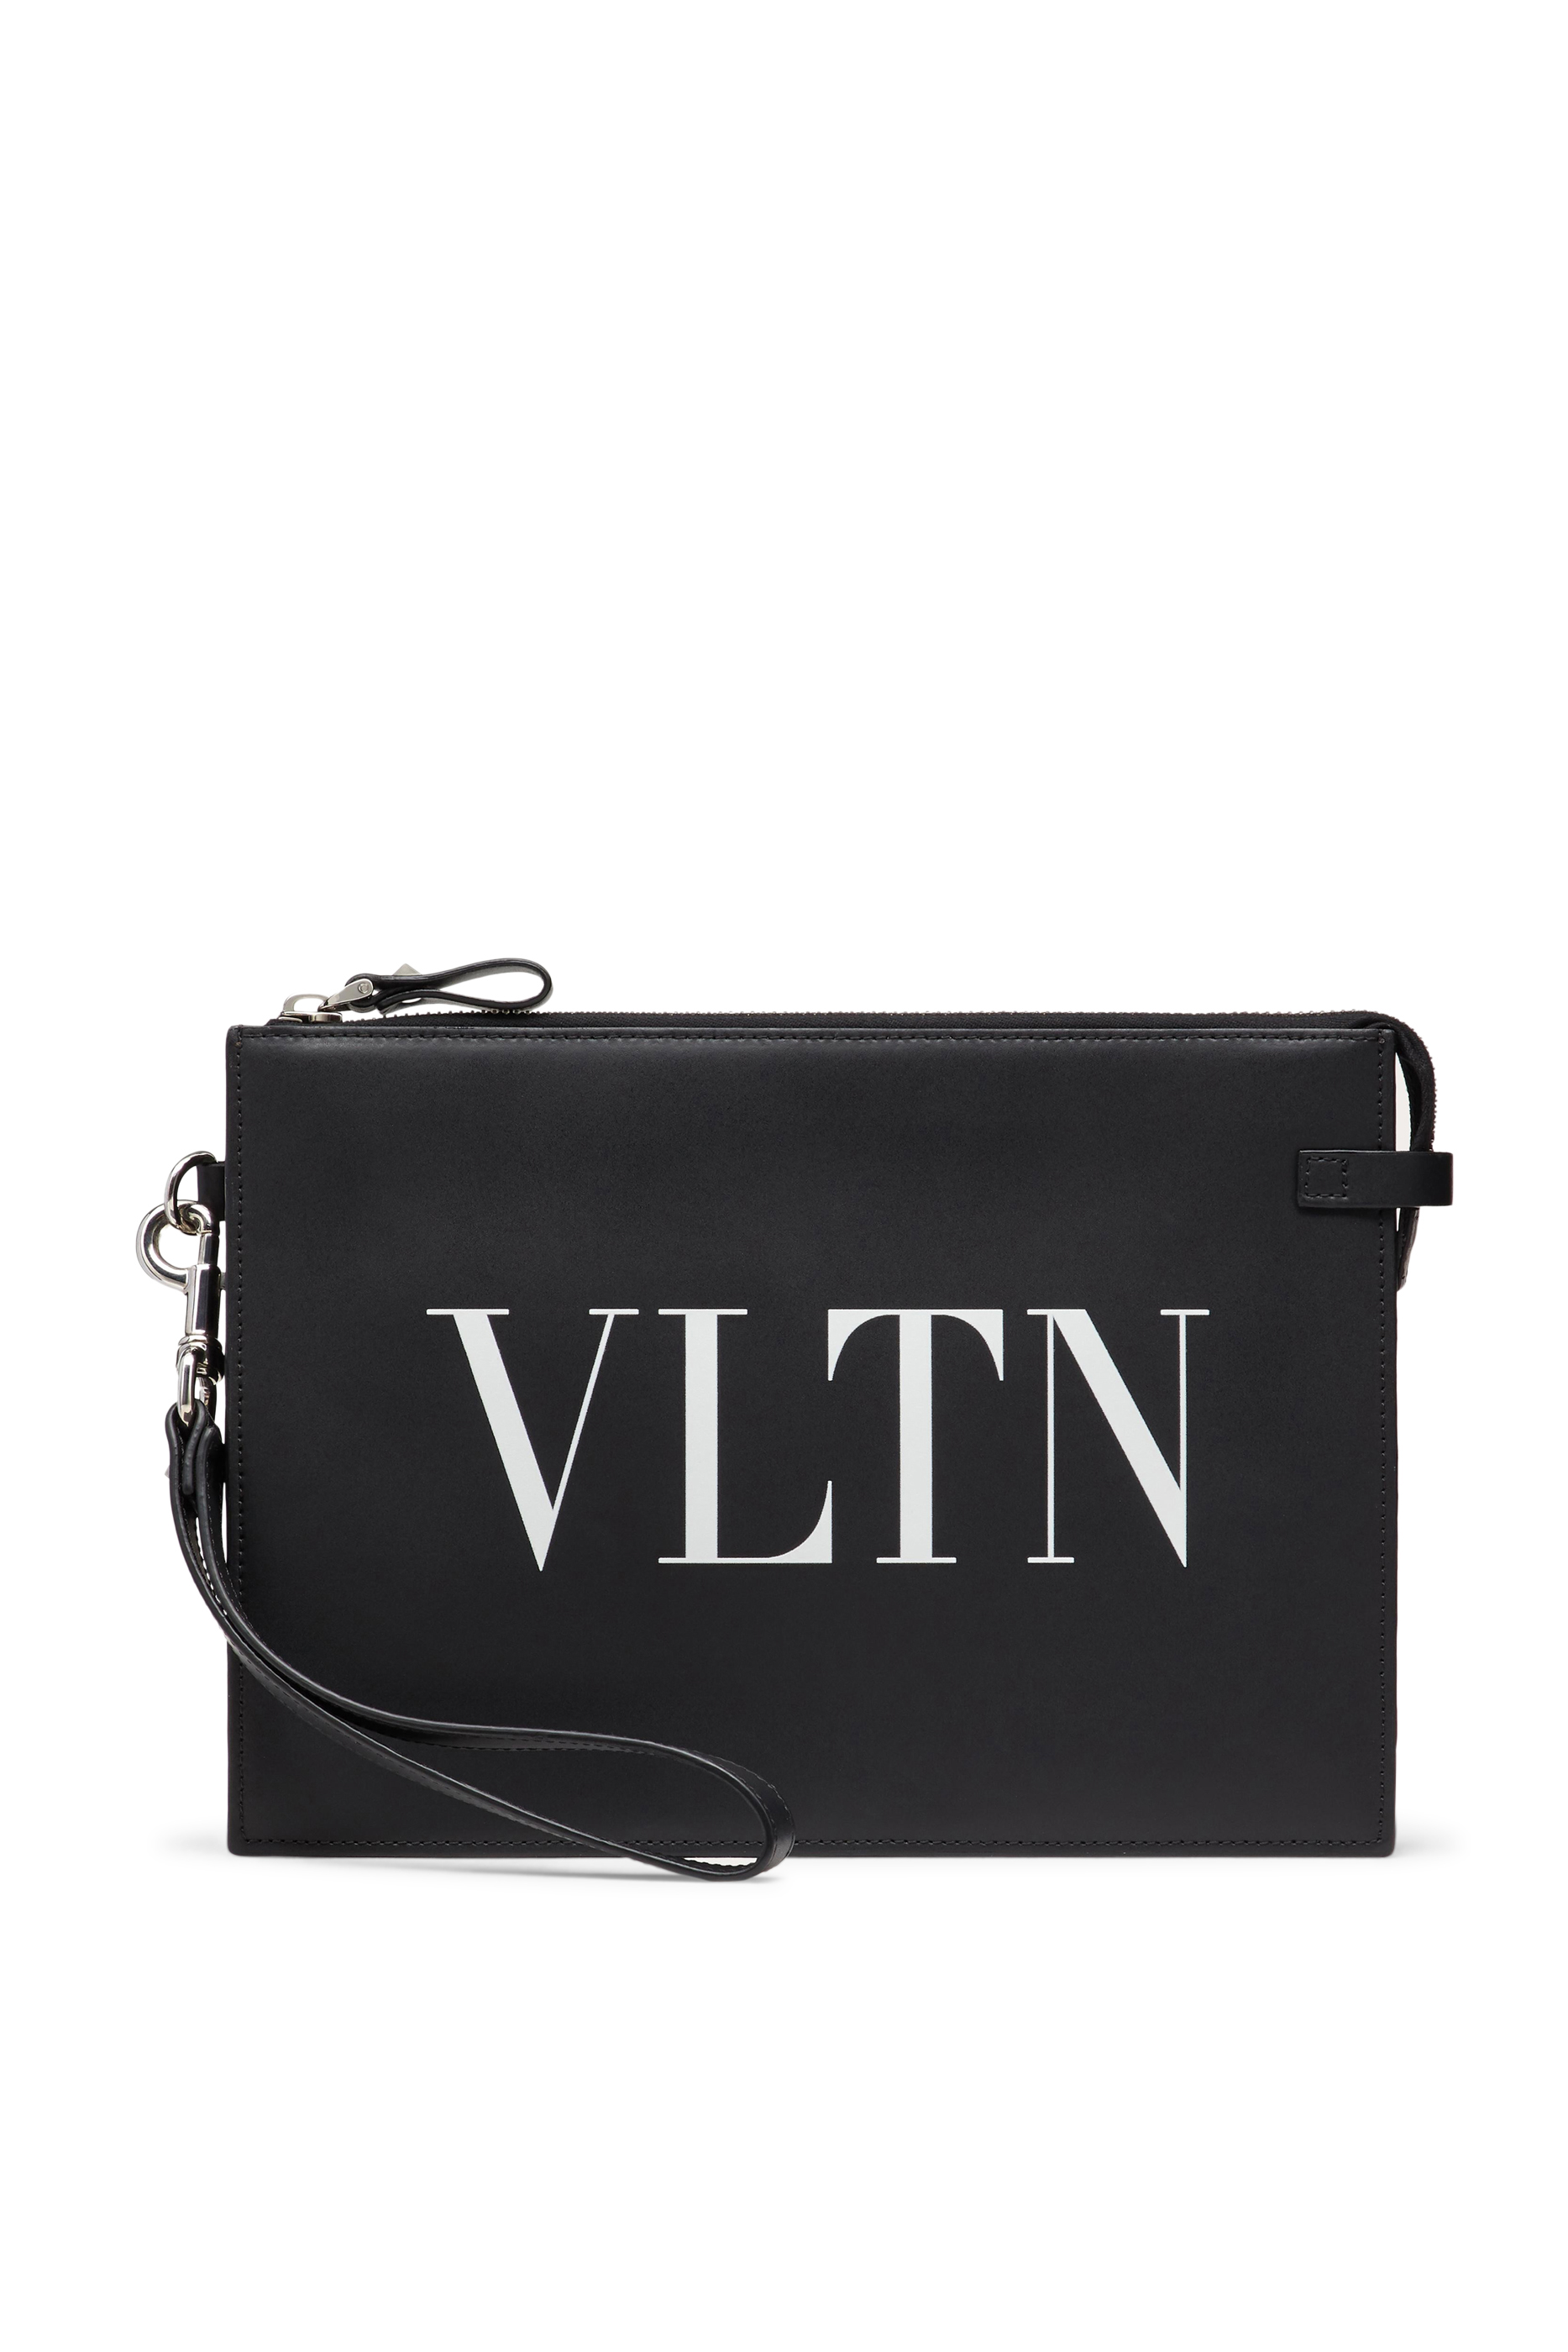 Buy Valentino VLTN Leather Pouch for Mens | Bloomingdale's Kuwait